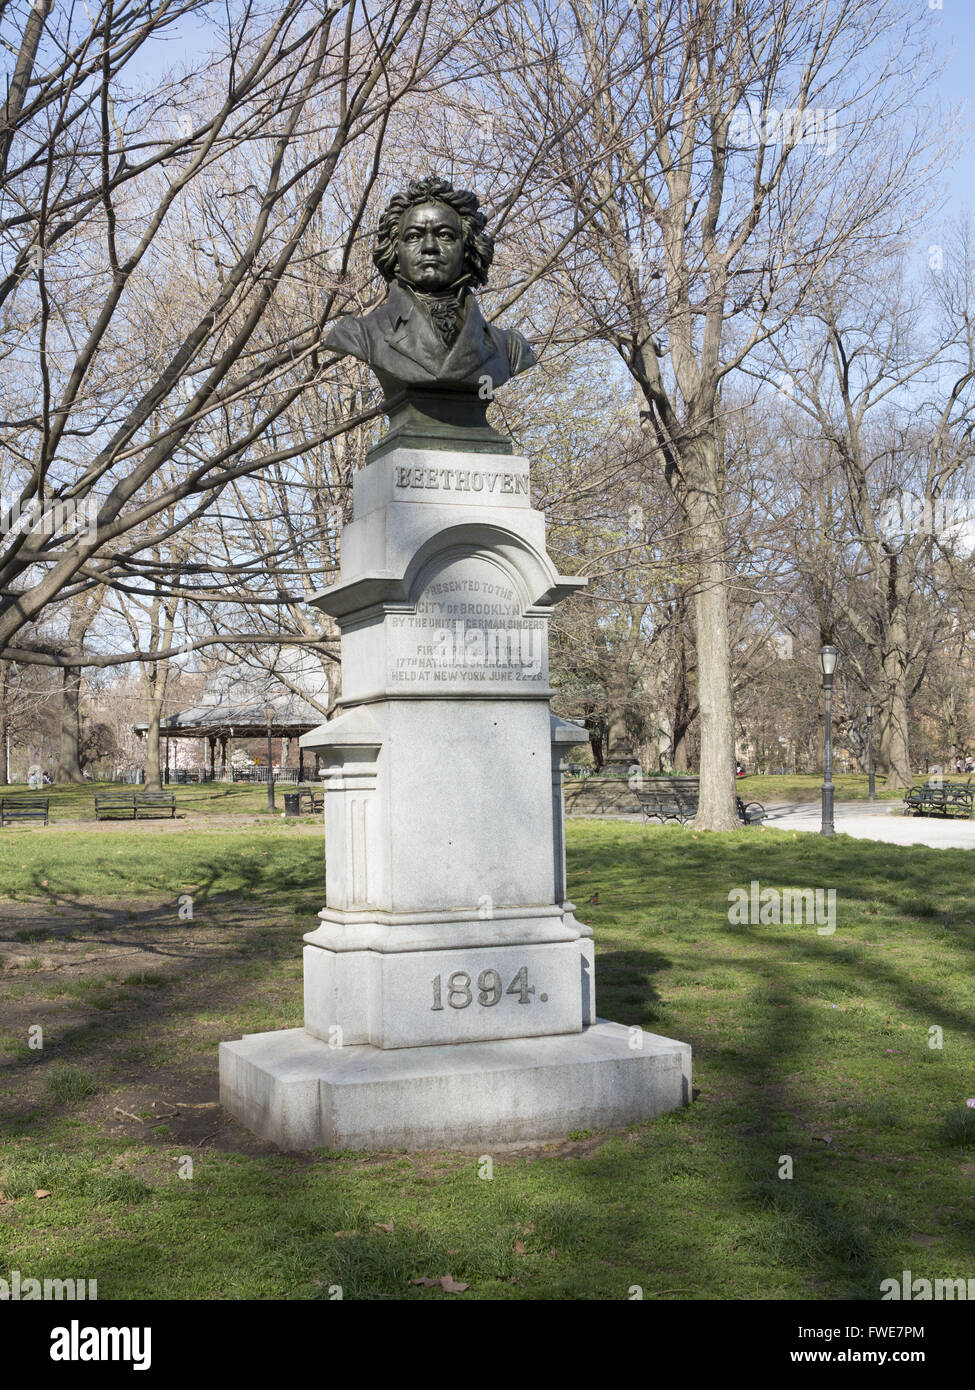 The bronze bust of the world renowned German composer Ludwig van Beethoven (1770–1827) was created by the German-American sculptor Henry Baerer (1837–1908). Dedicated in 1894 in the Prospect Park Concert Grove, the statue is one of seven in the immediate vicinity which include Wolfgang Amadeus Mozart, Karl Maria Von Weber, Edward Grieg, Washington Irving, Abraham Lincoln, and Thomas Moore. Stock Photo